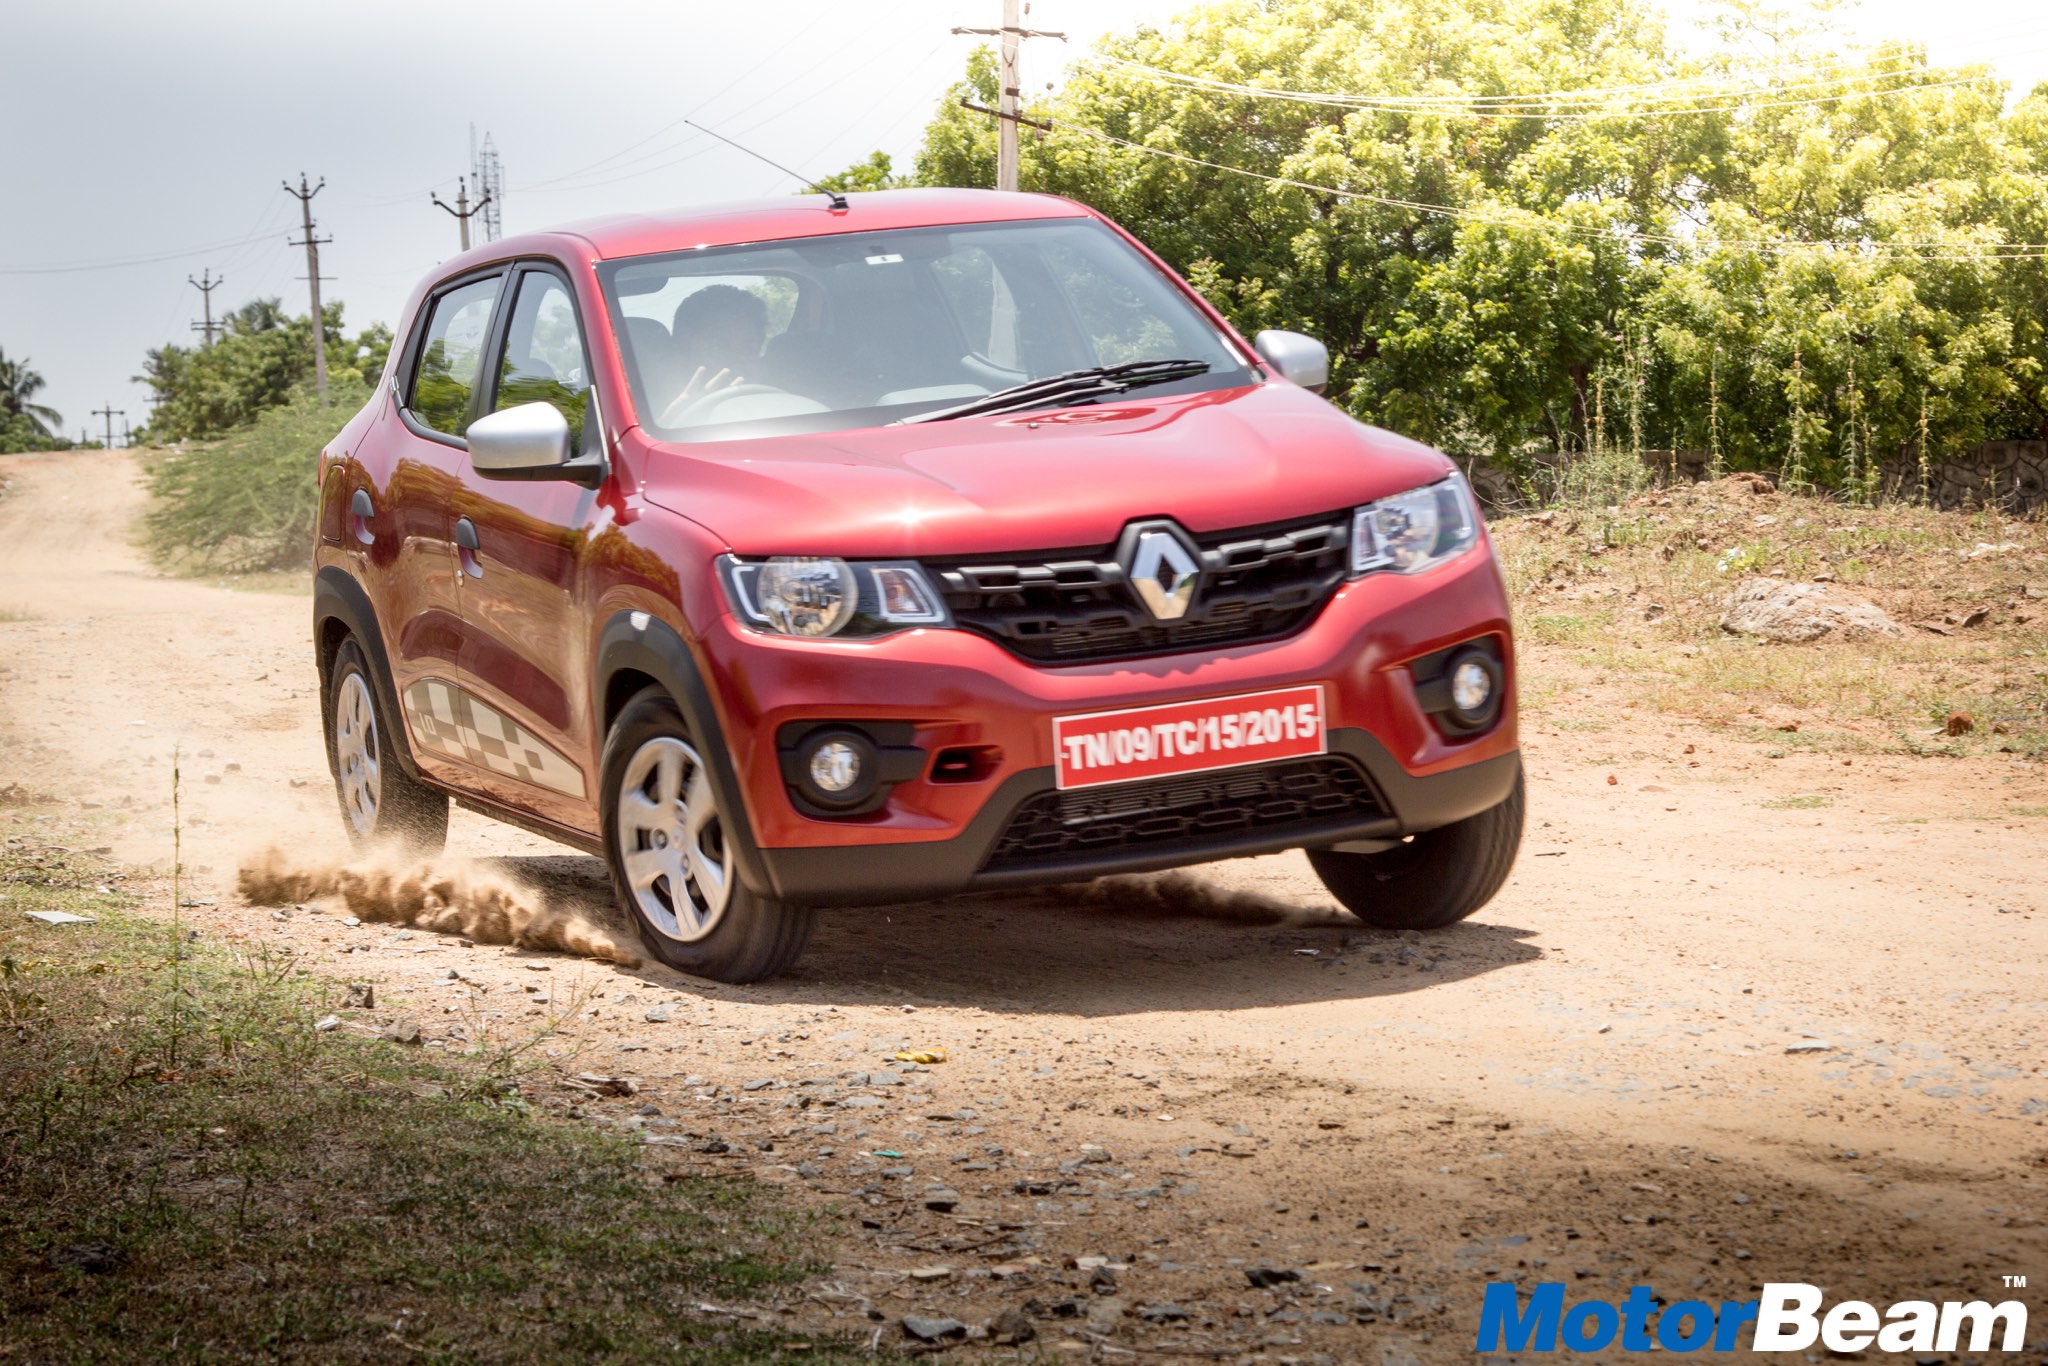 Renault Kwid 1.0-Litre Test Drive Review